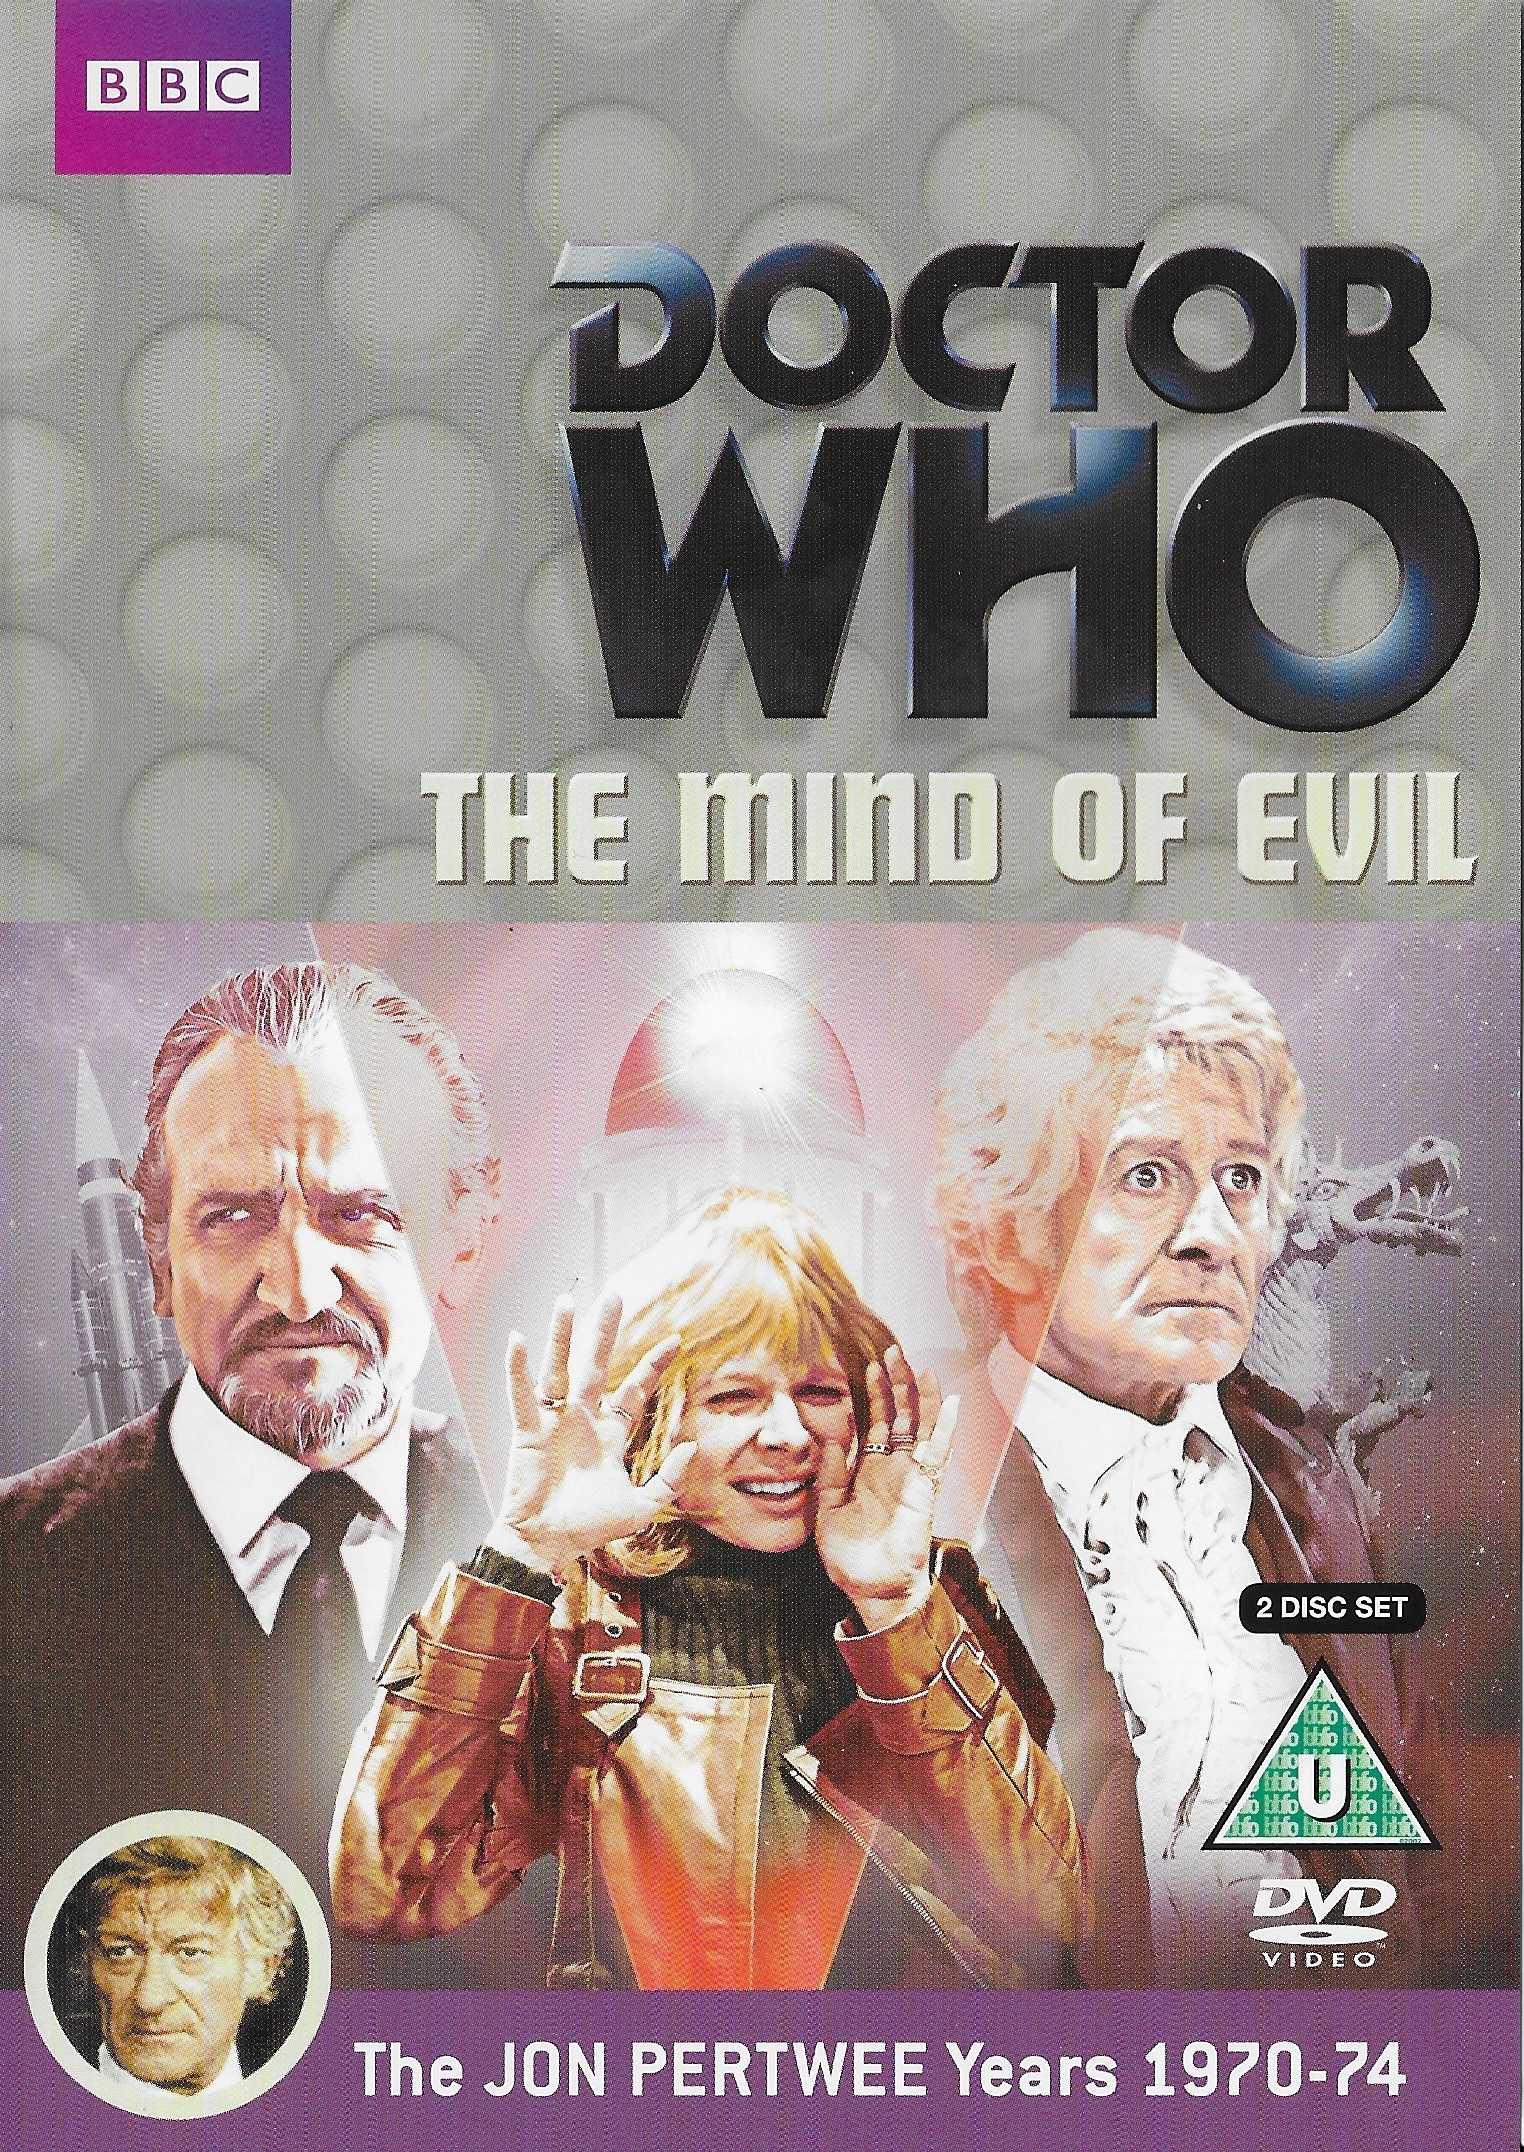 Picture of BBCDVD 3269 Doctor Who - The mind of evil by artist Robert Holmes from the BBC records and Tapes library